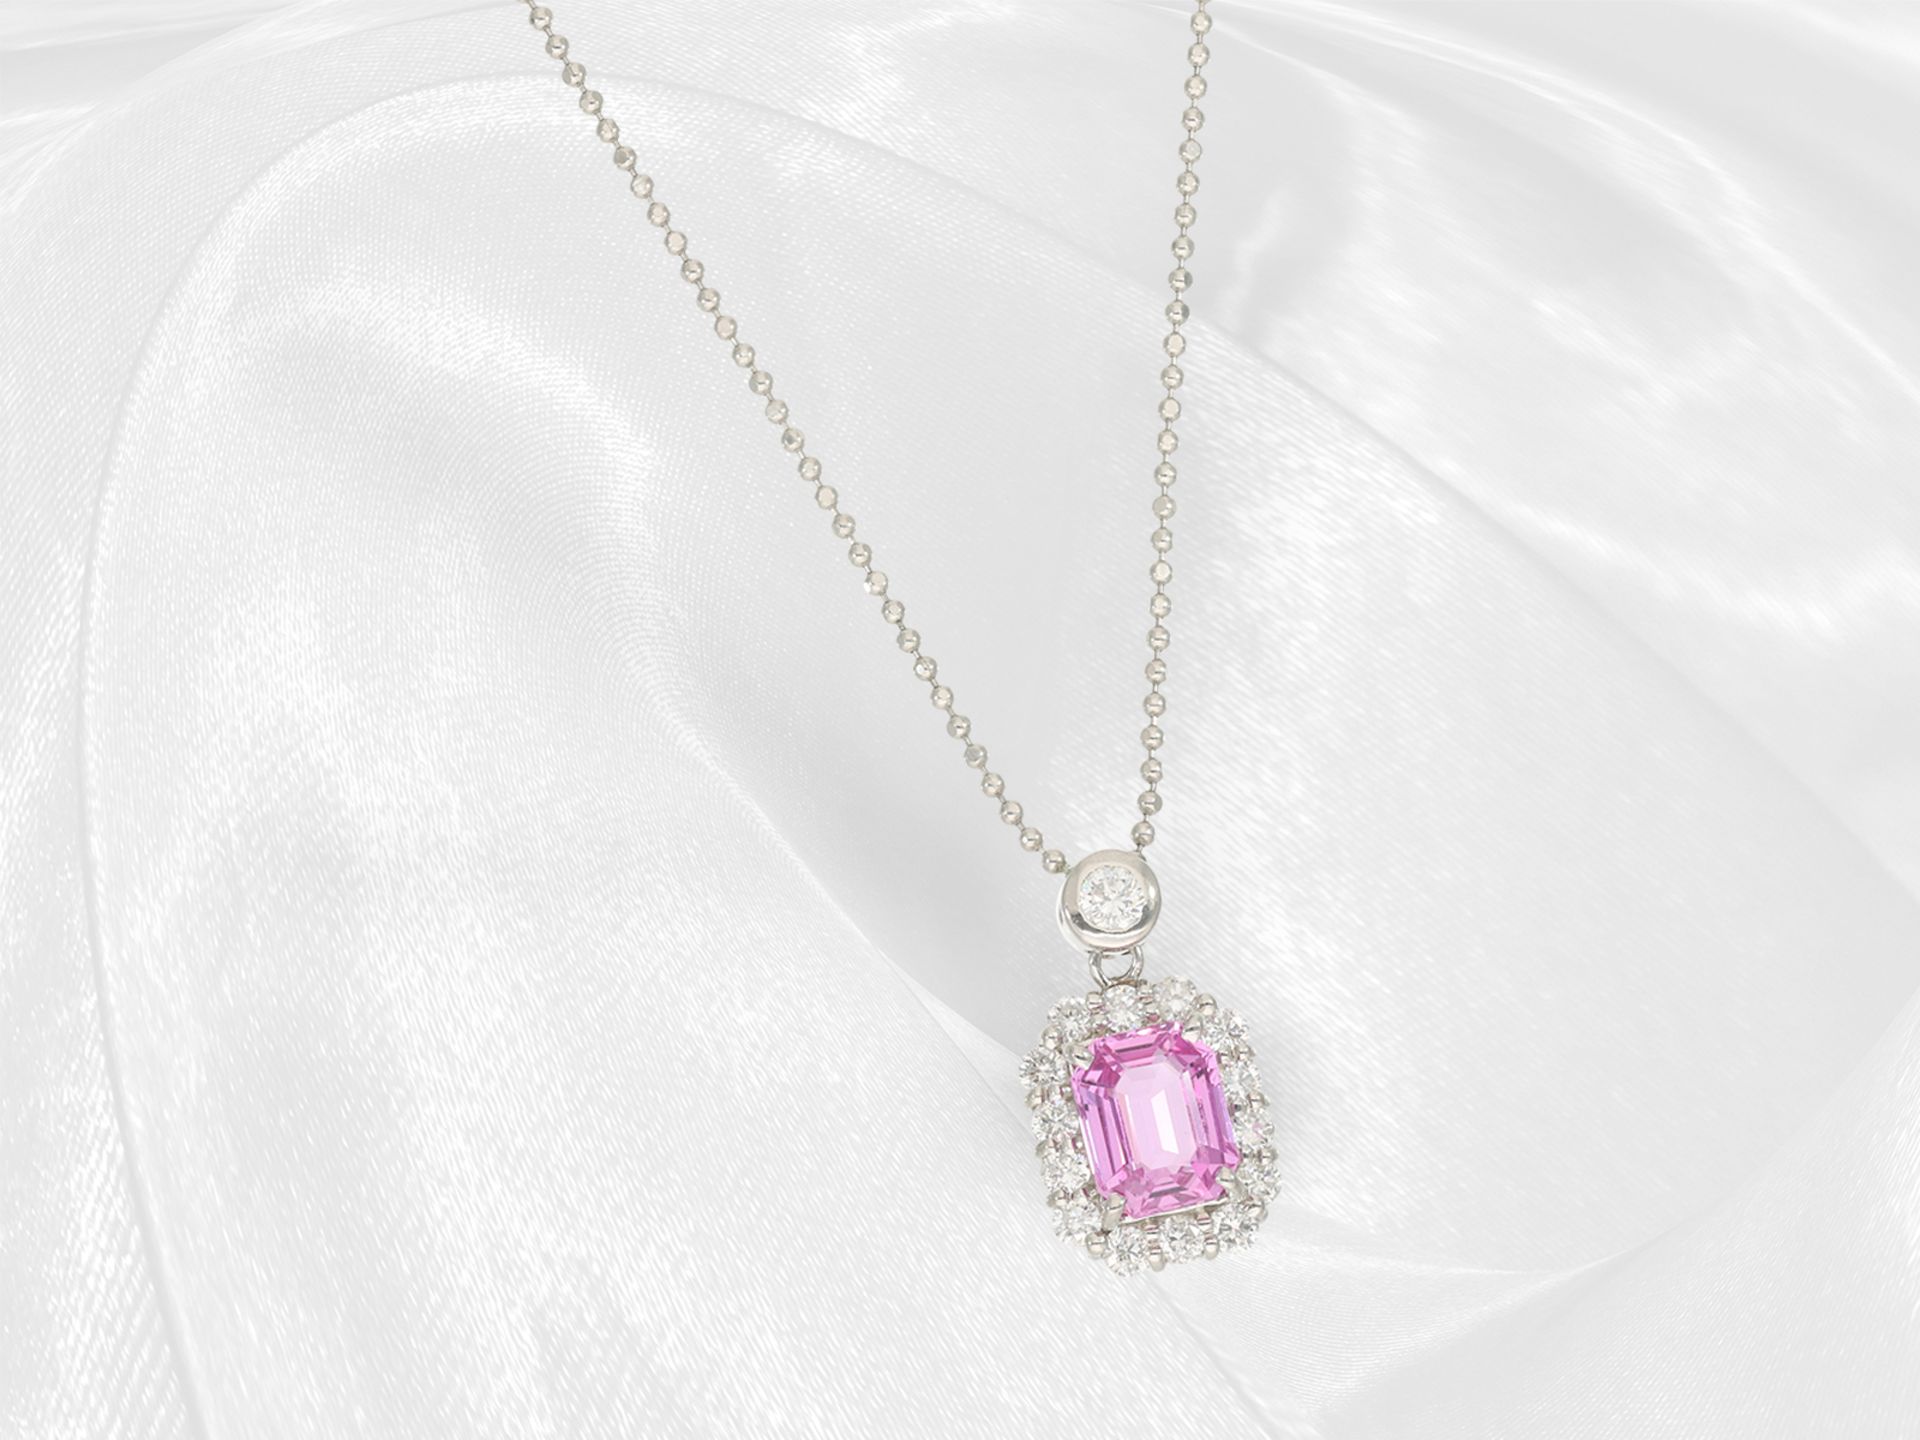 Necklace/pendant: fine platinum chain with high-quality pendant, pink sapphire and brilliant-cut dia - Image 3 of 3